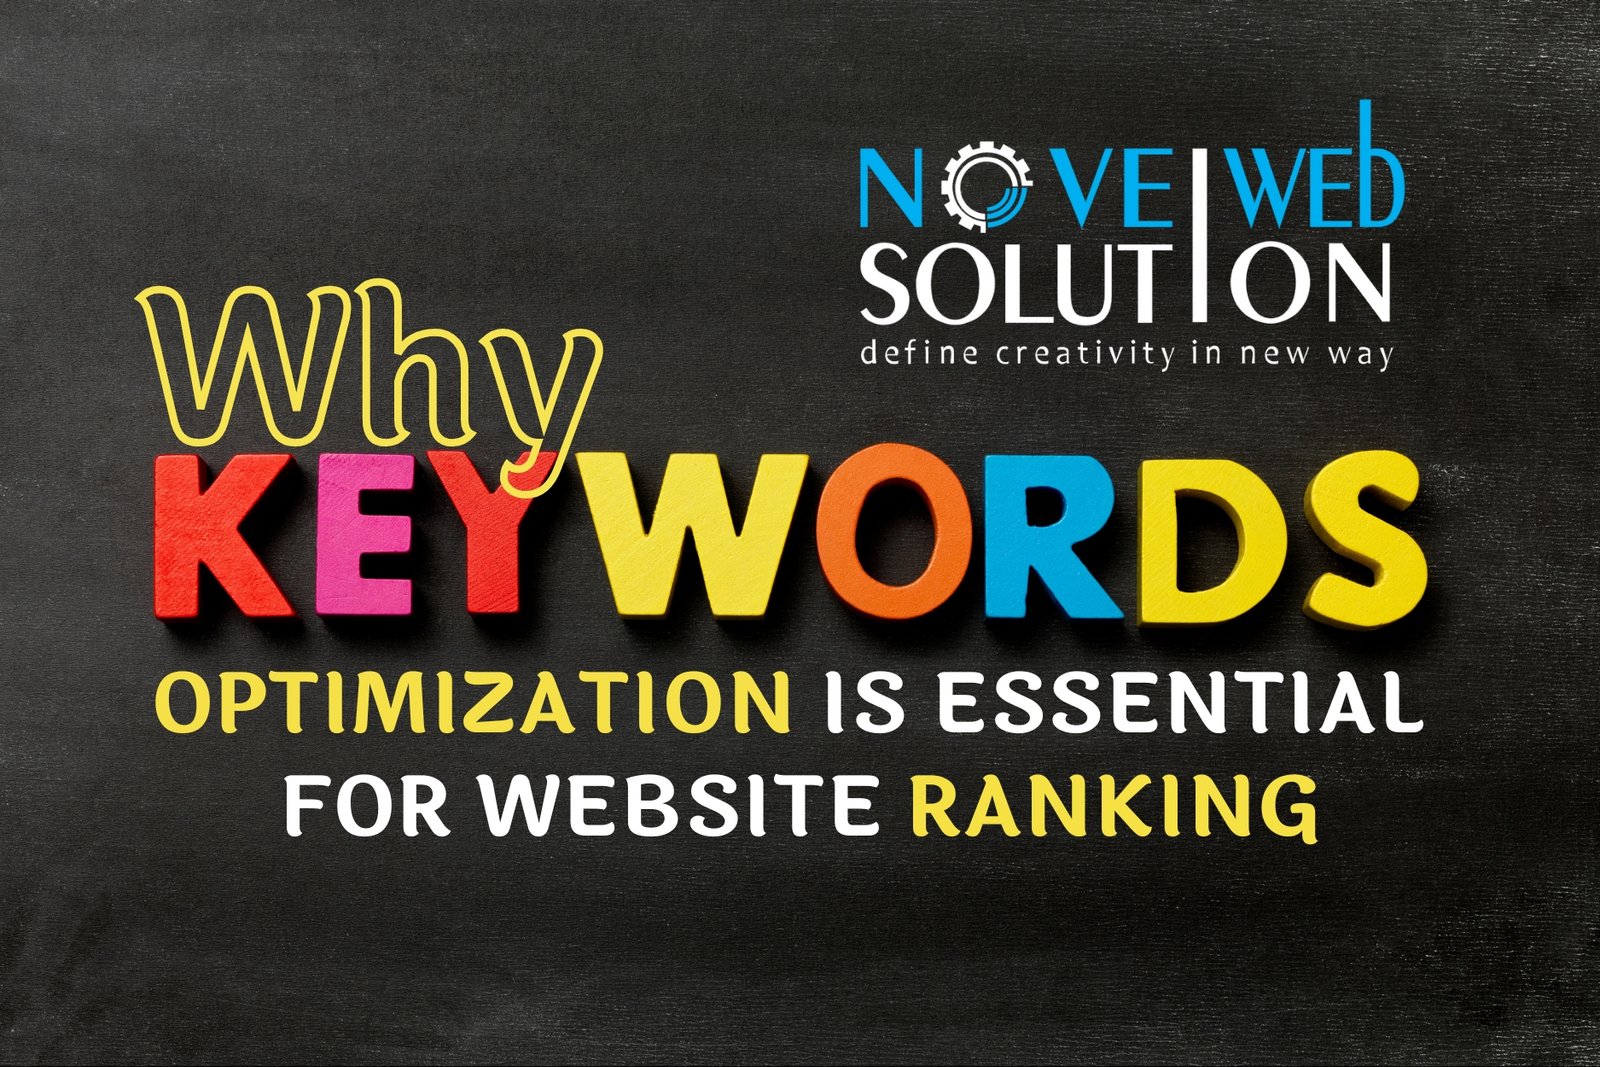 Why Keyword Optimization is Essential for Website Ranking